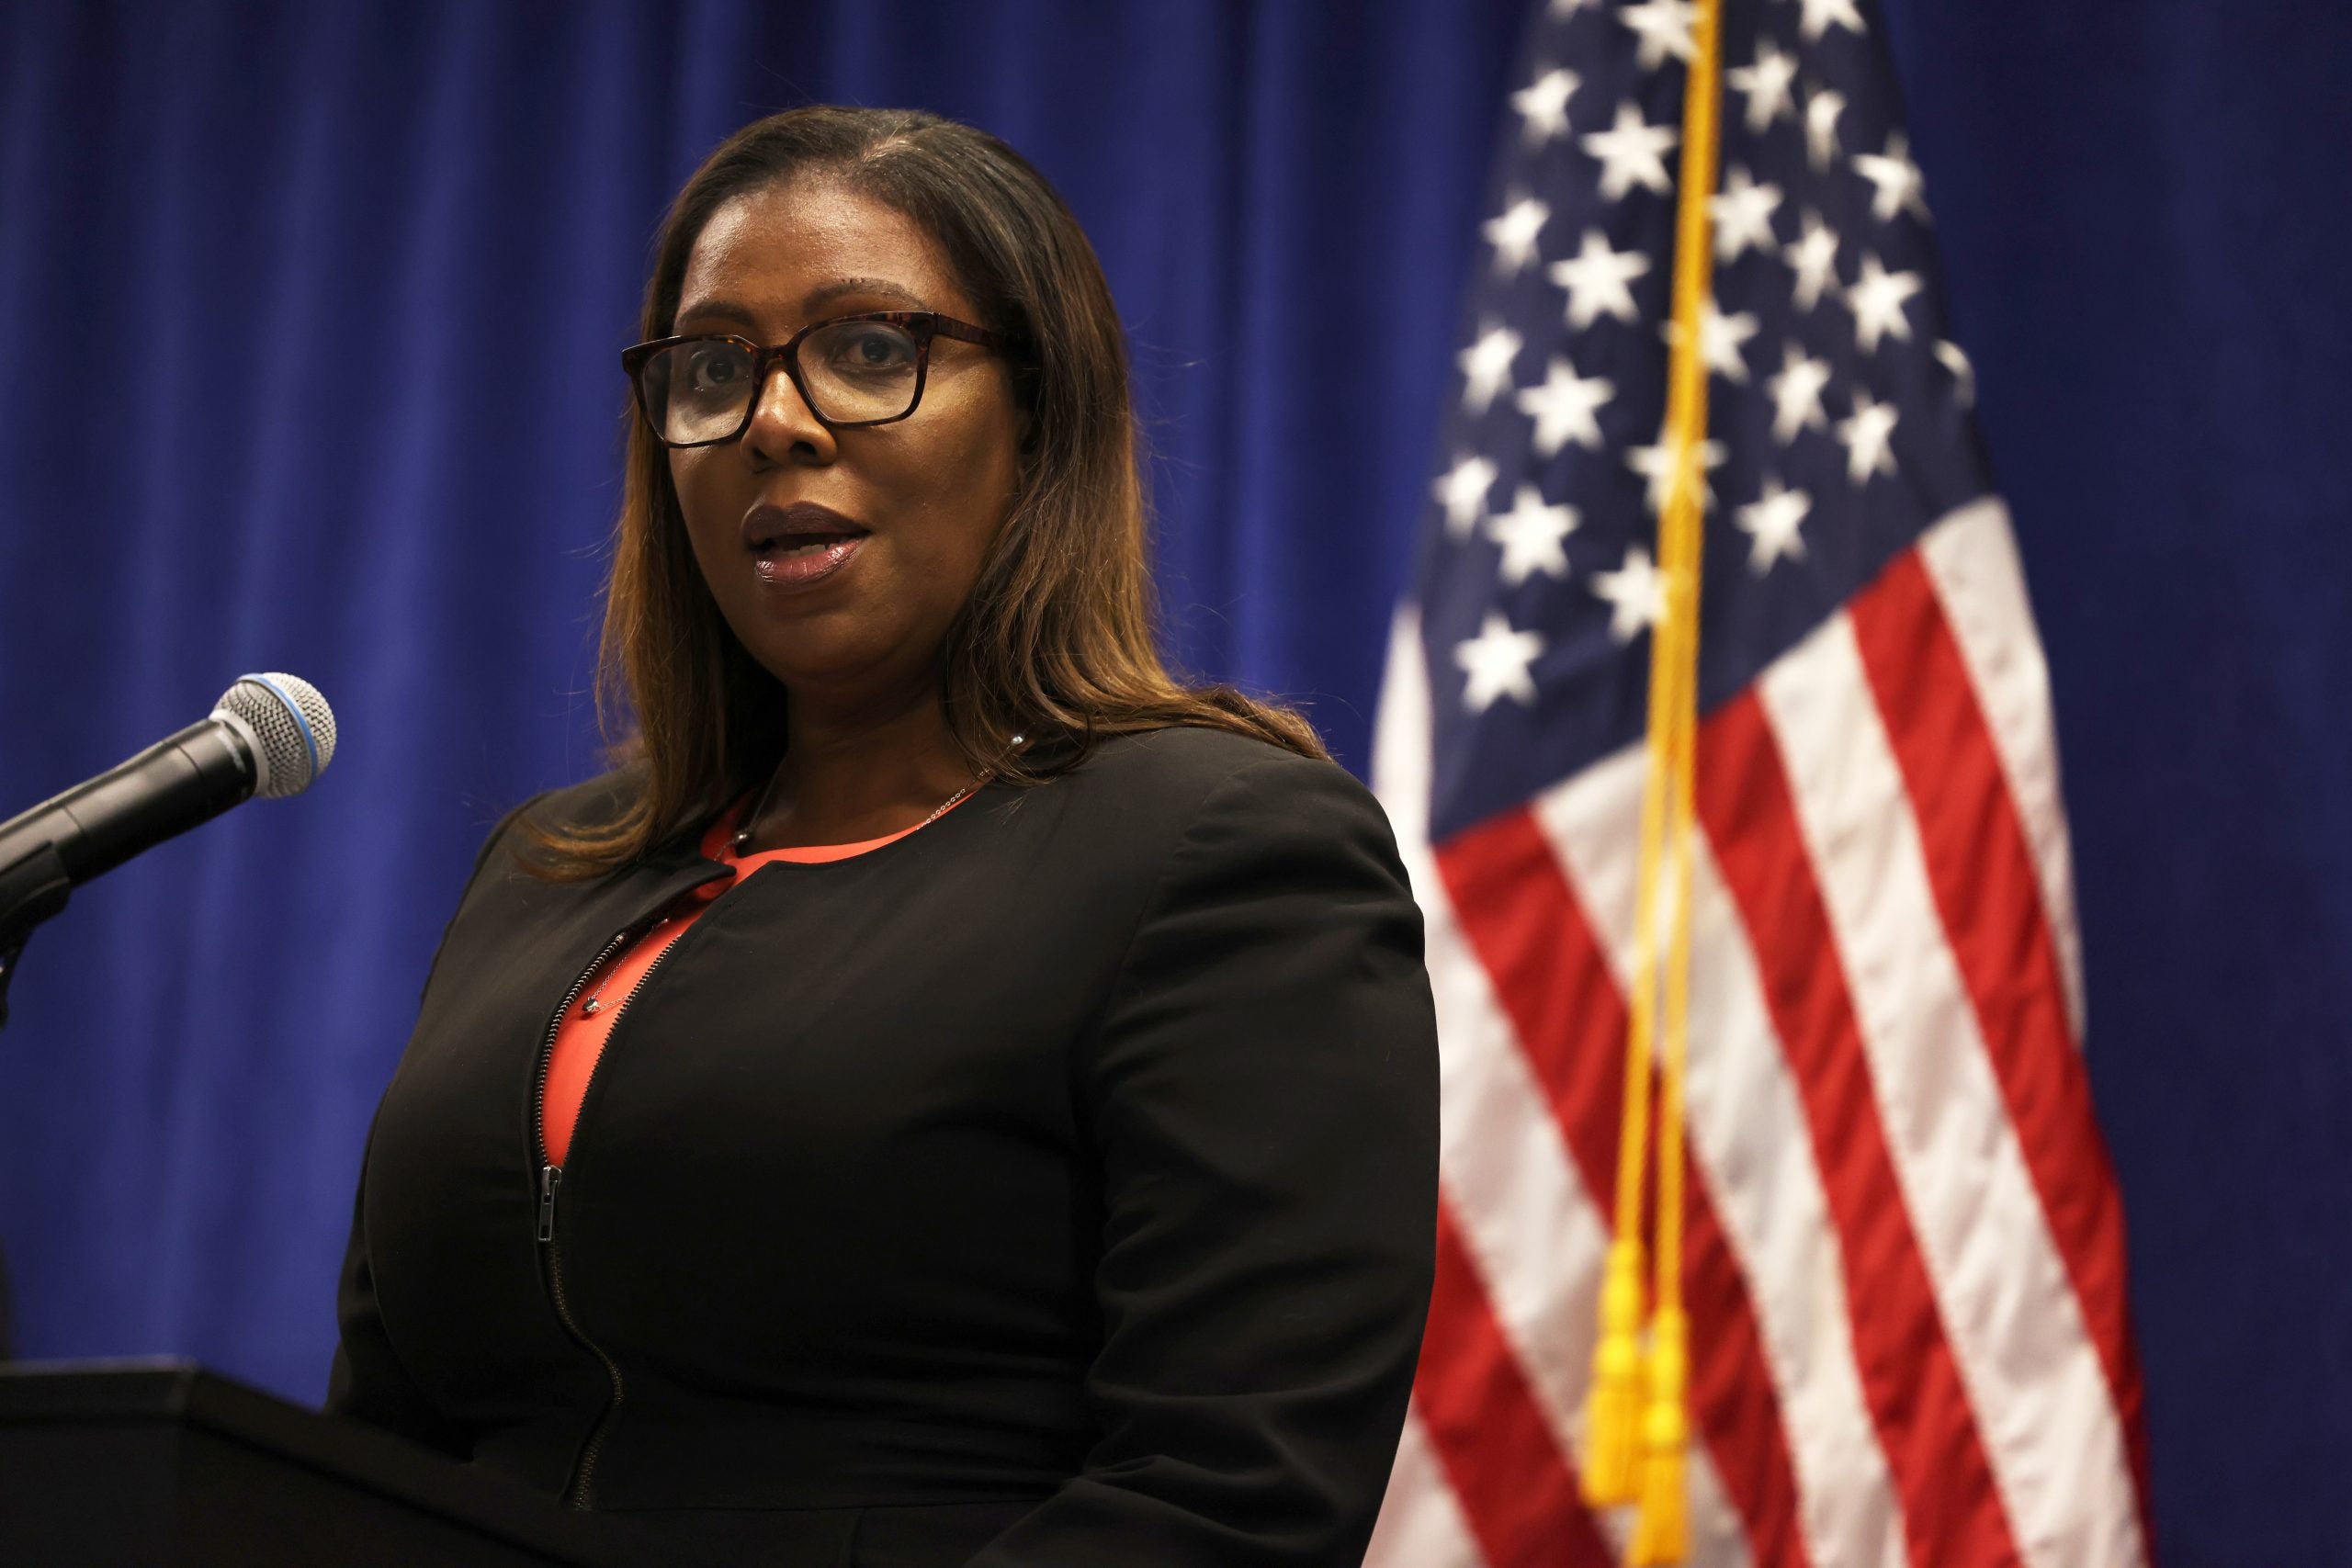 Letitia James Officially Announces Her Run For Governor After Serving As New York's First Black Attorney General